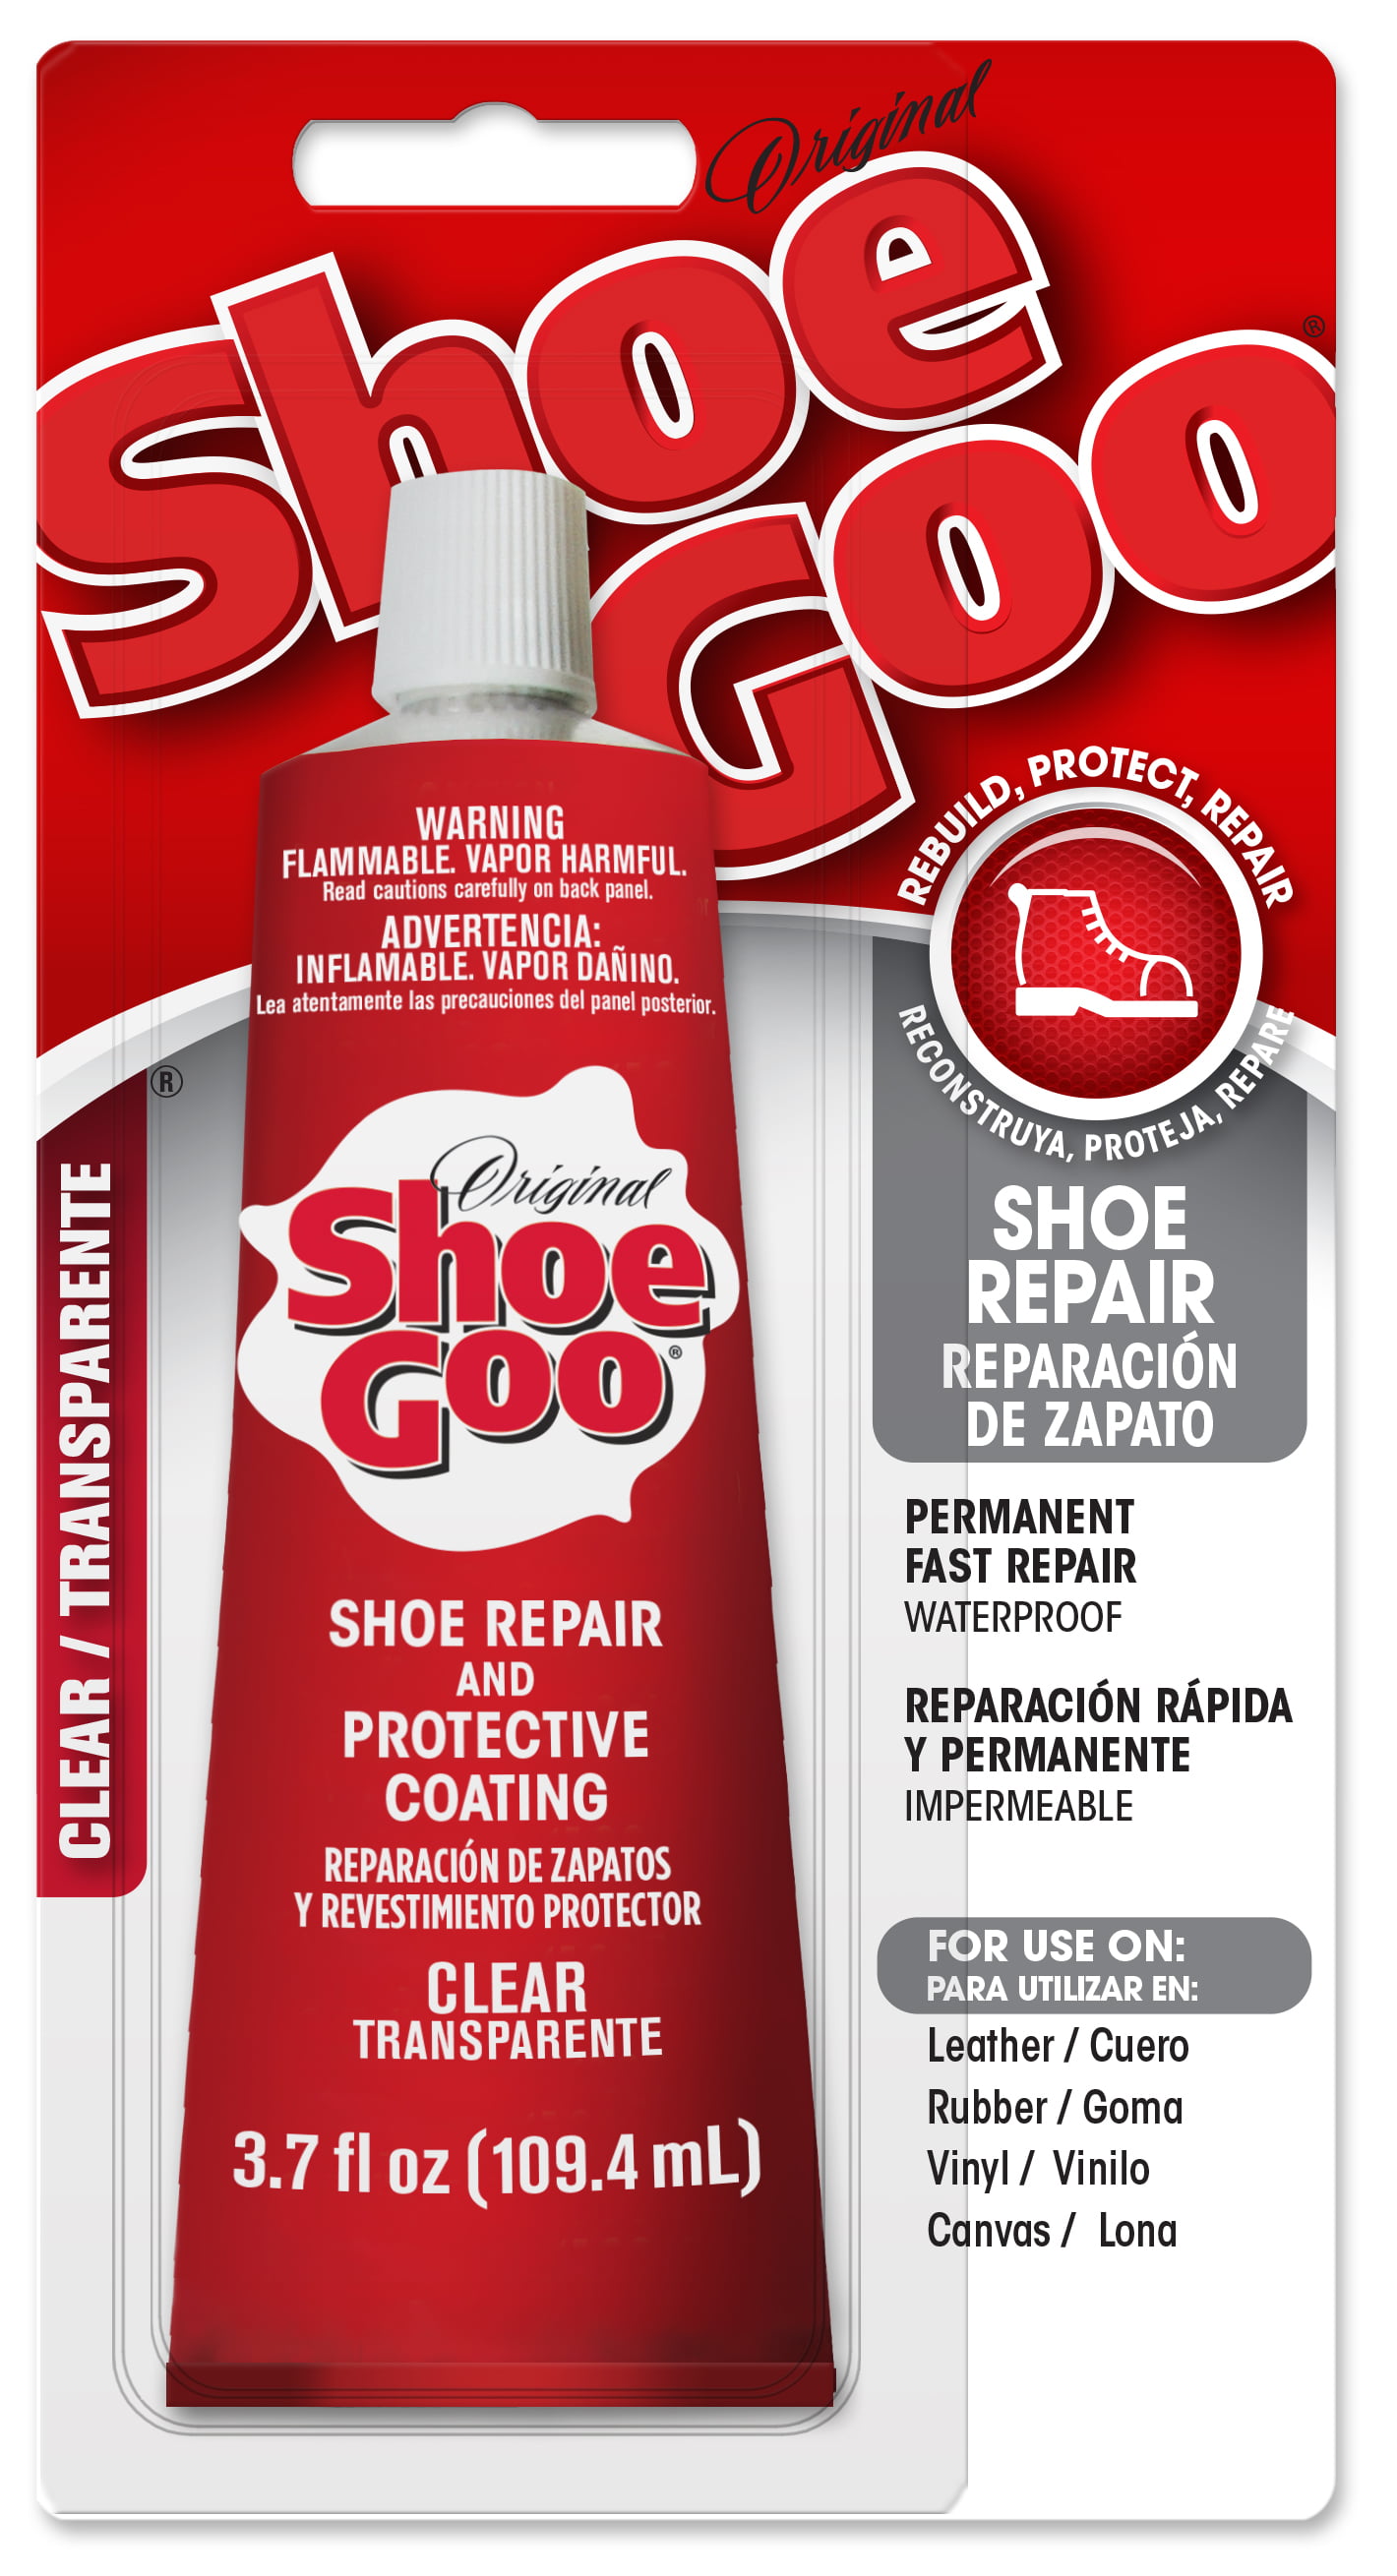 What Is The Best Glue To Fix Shoes